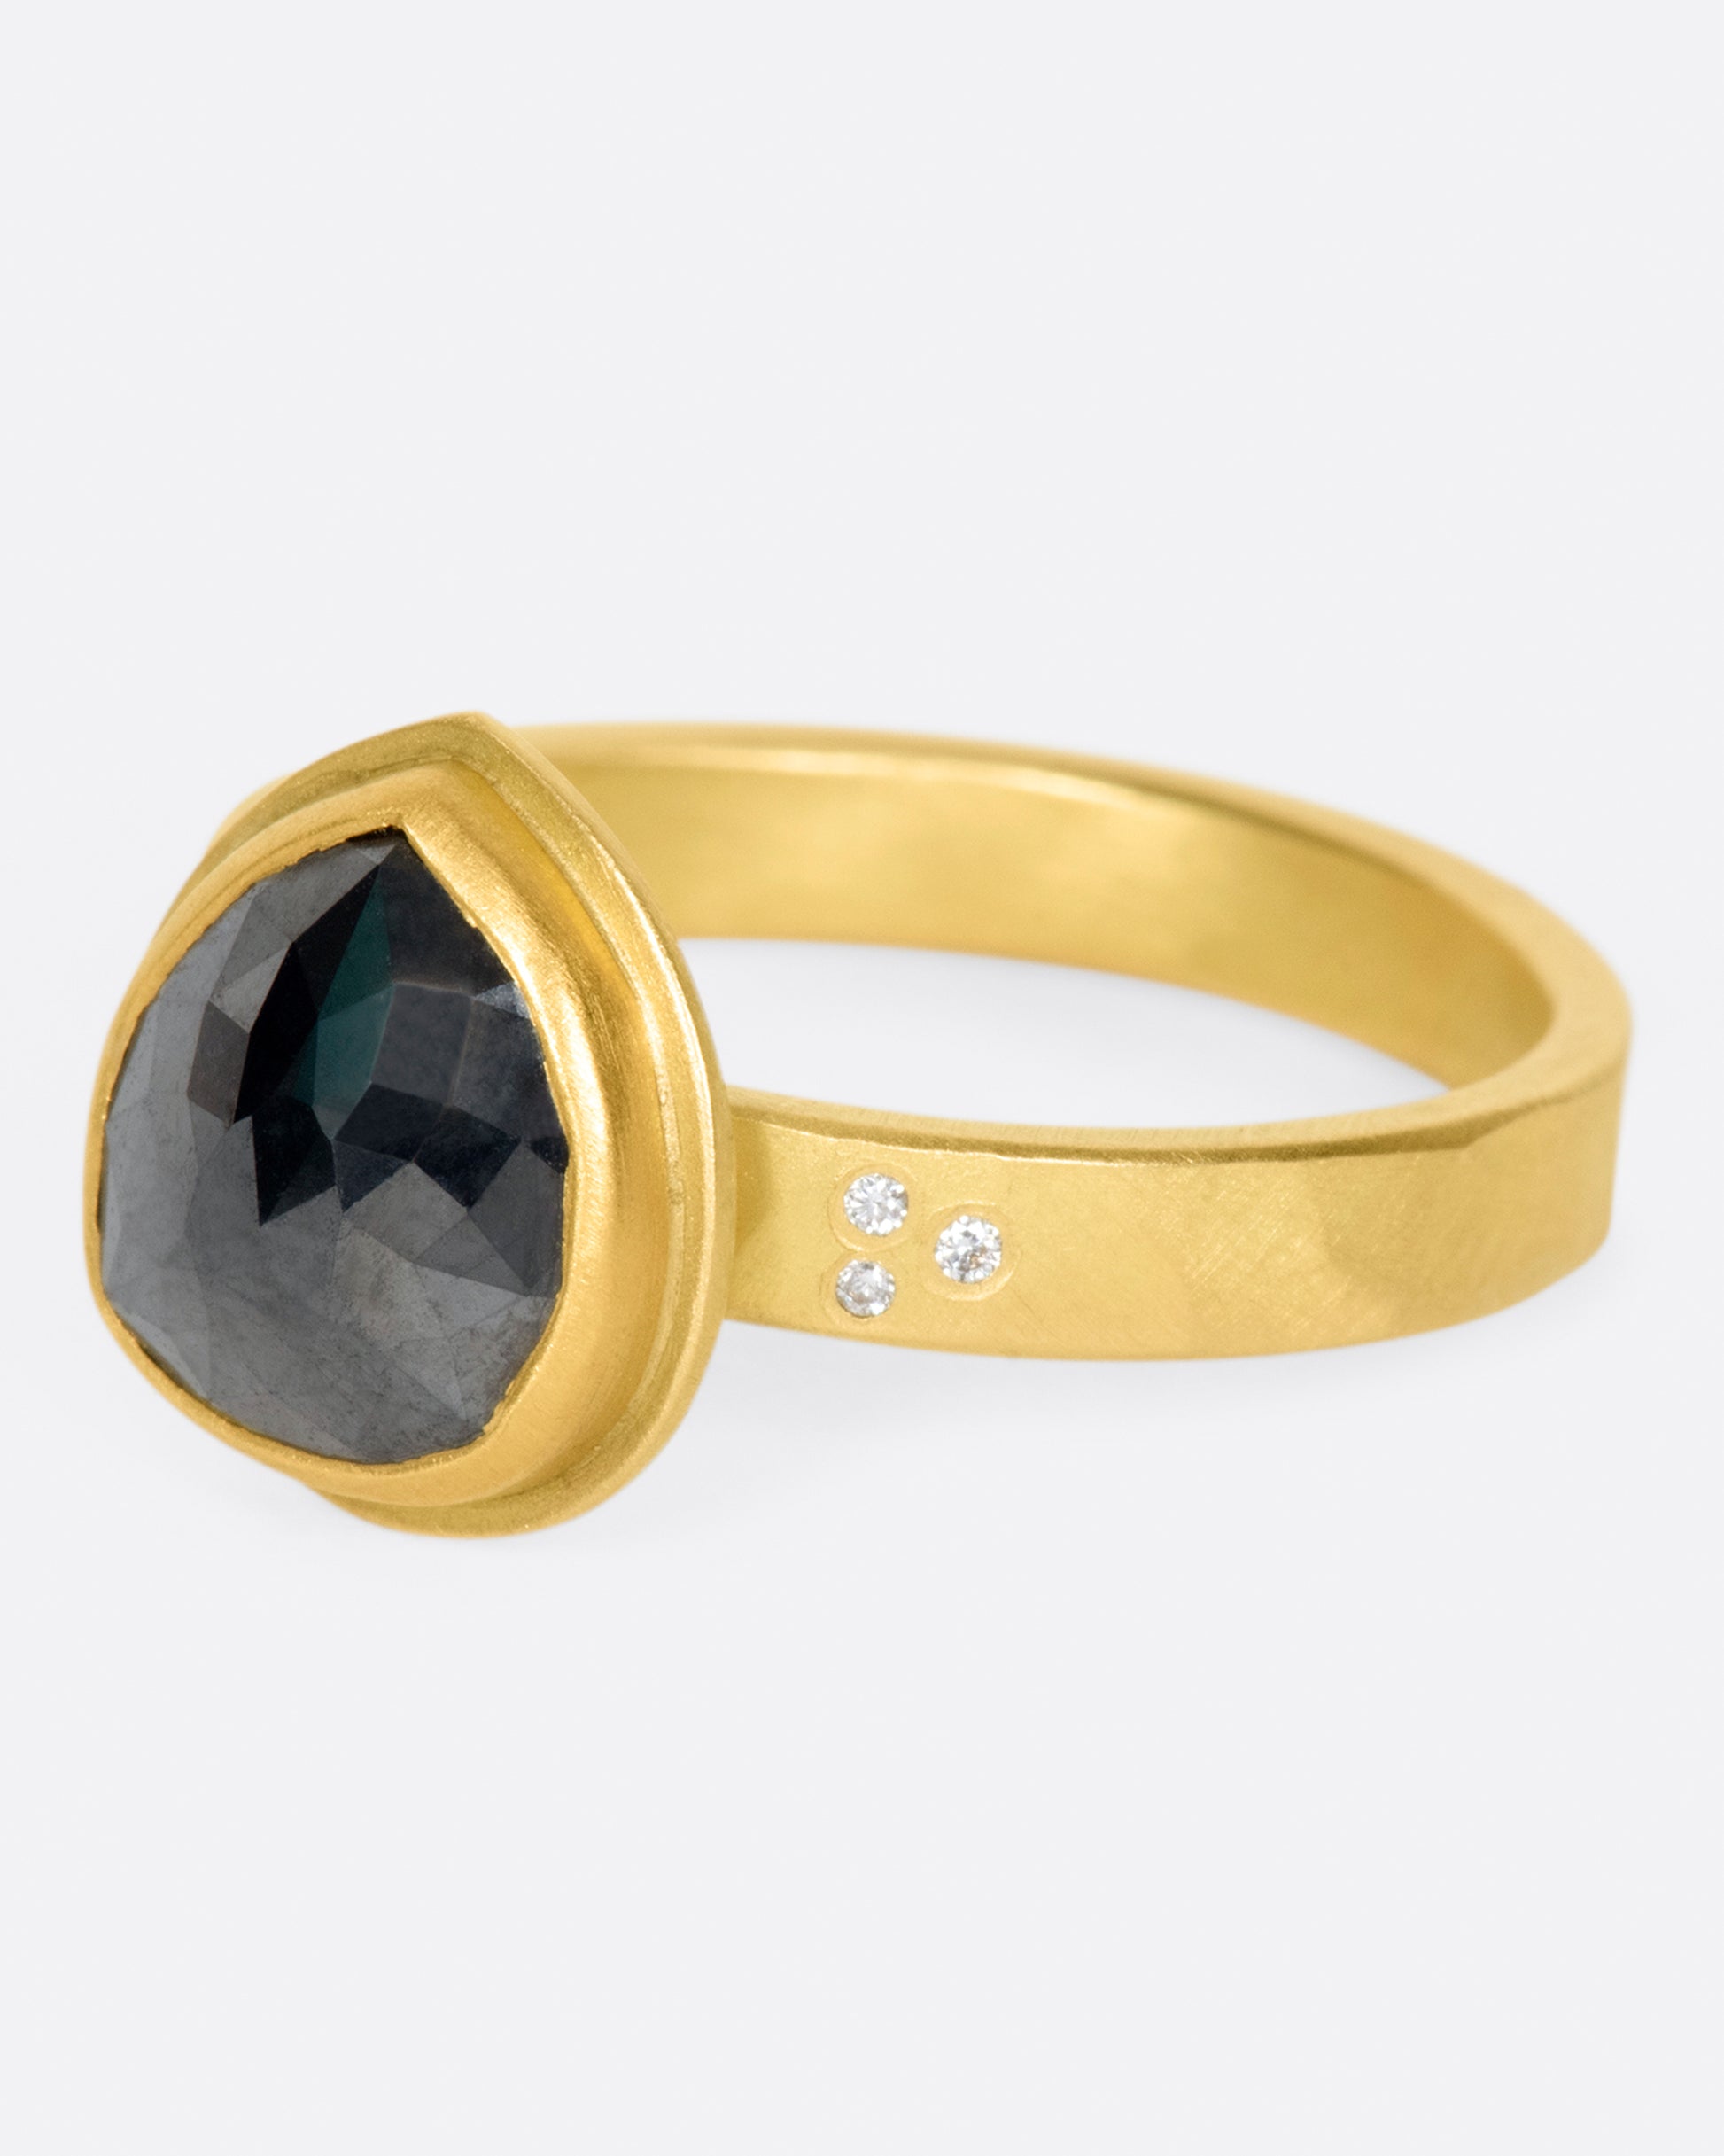 A faceted, pear shaped black diamond in a 22k gold setting with white diamond accents.